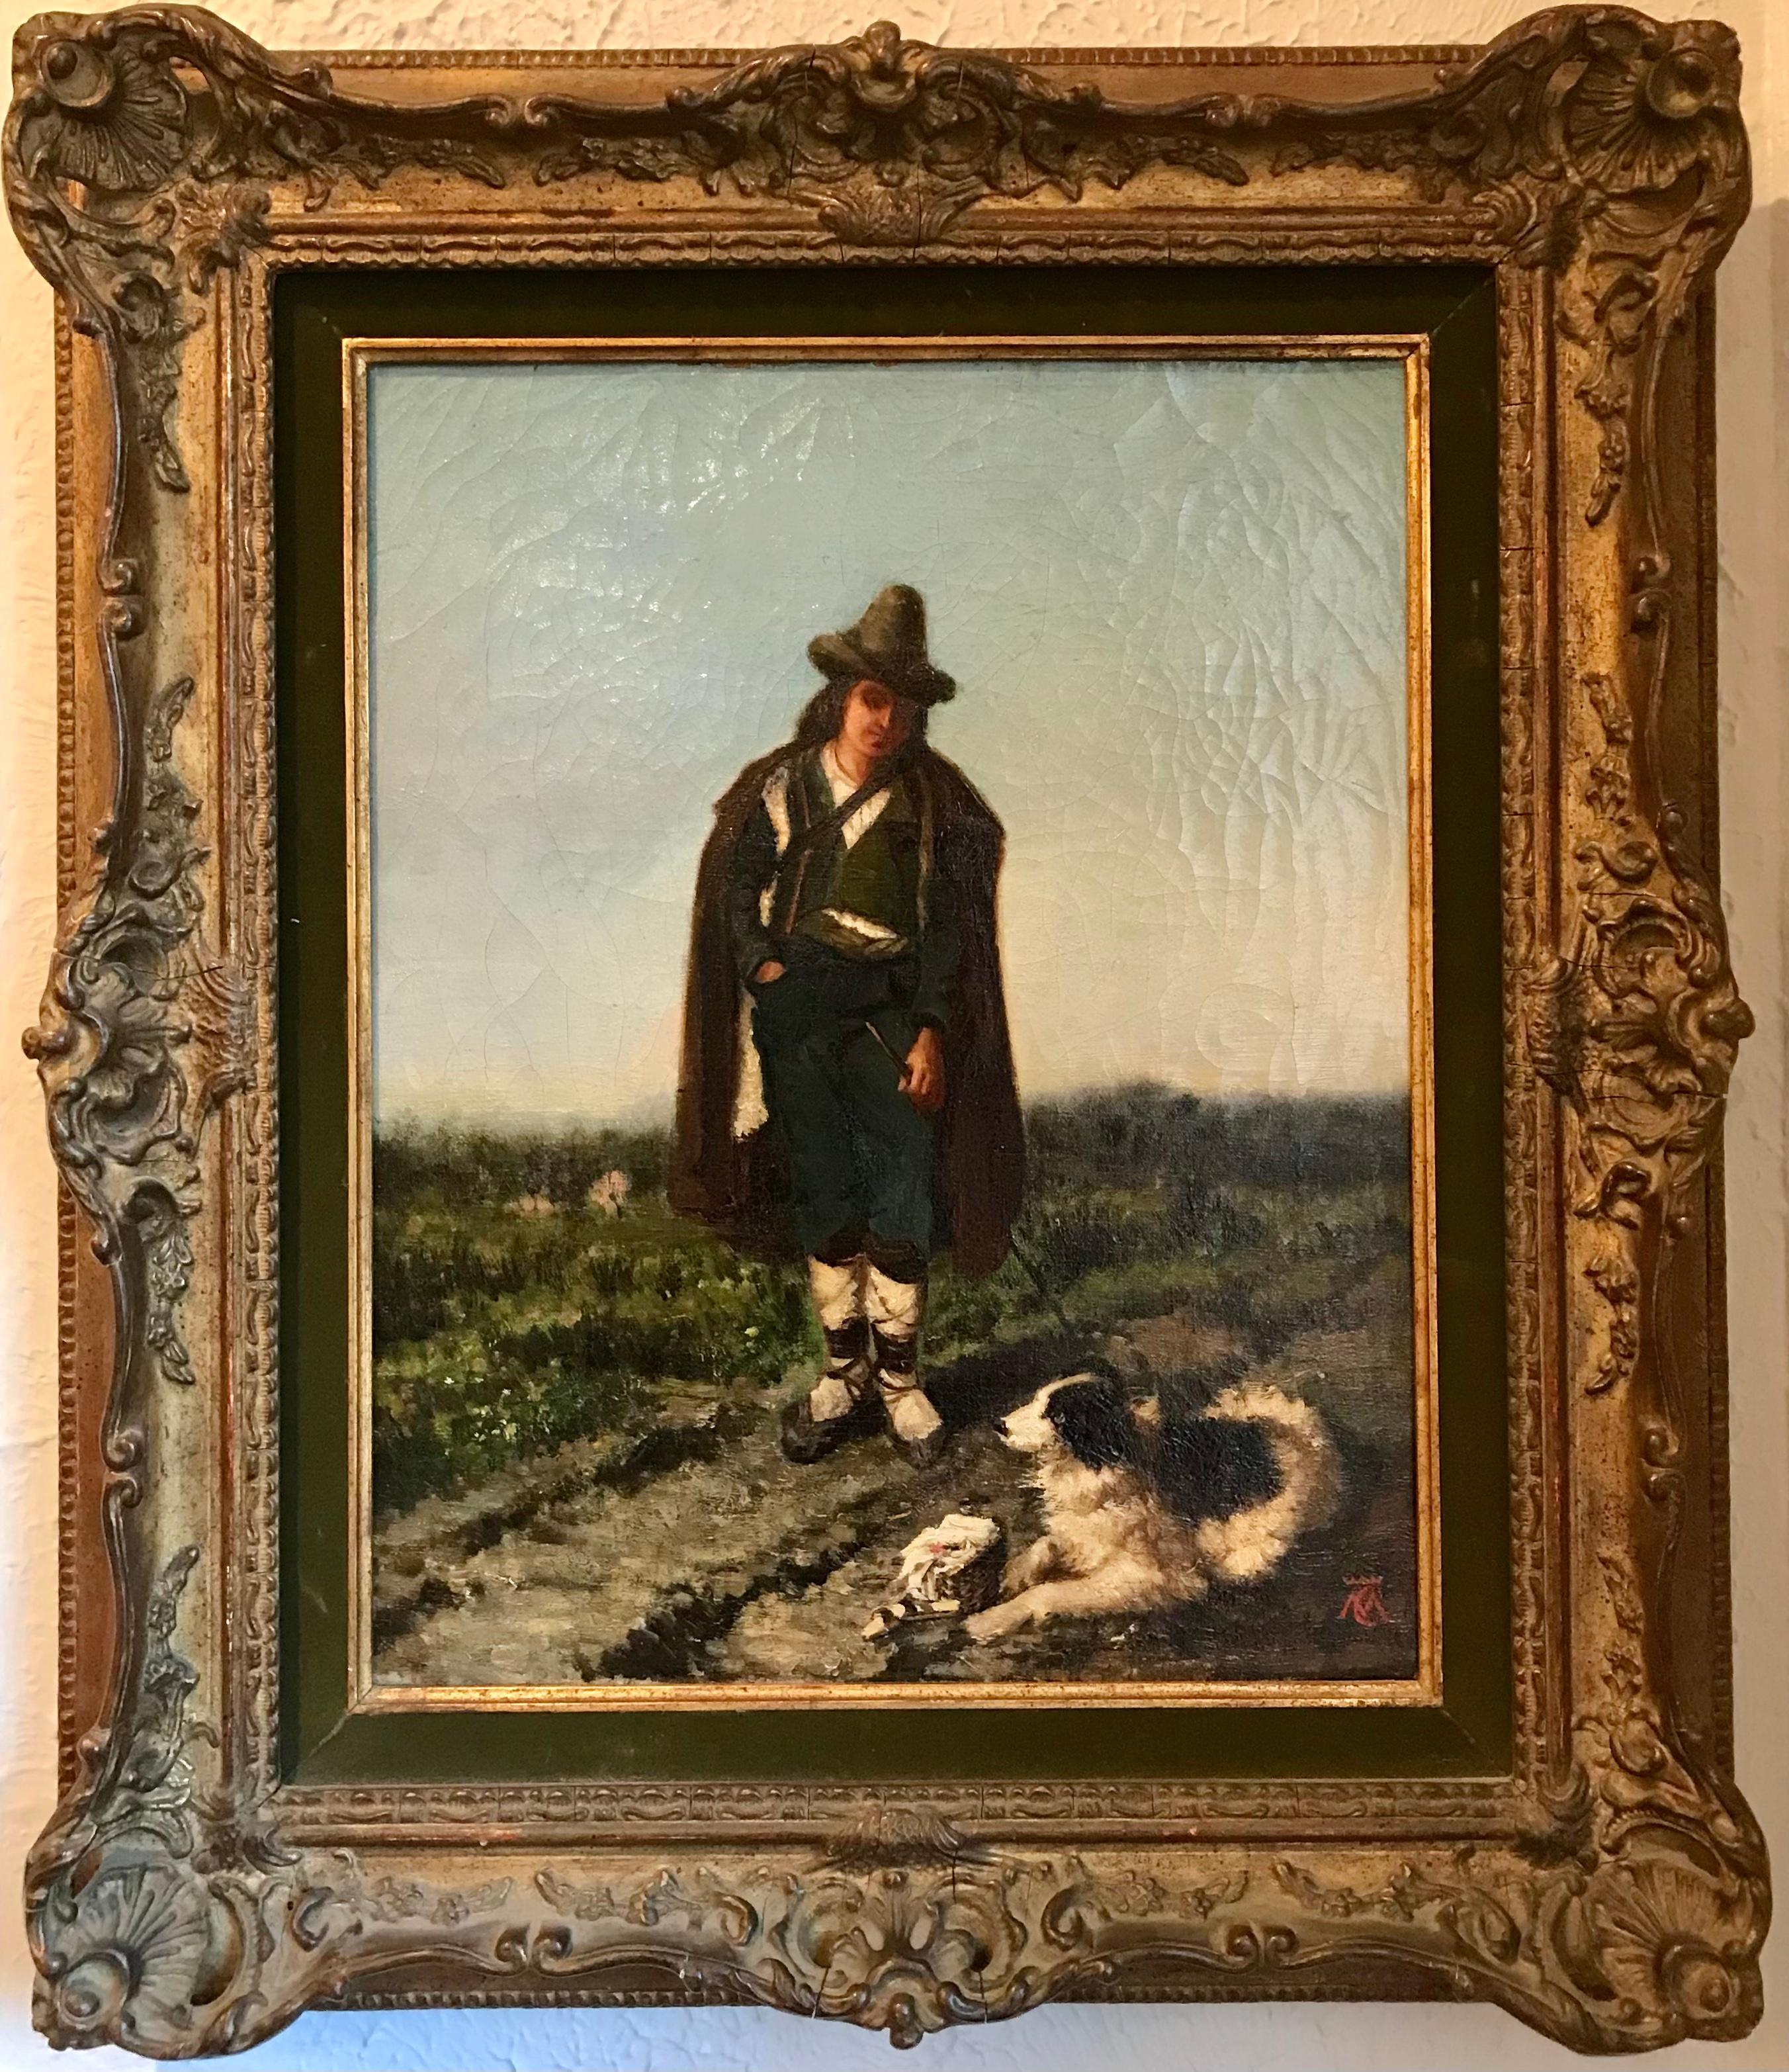 19th century european painting of a man and his dog in a field.

Signed with Crowned monogram MC or CM.

Oil on canvas. 

19th Century.

Framed.

The scene represents and man snd his dog passing a moment in a field. Imagination takes over